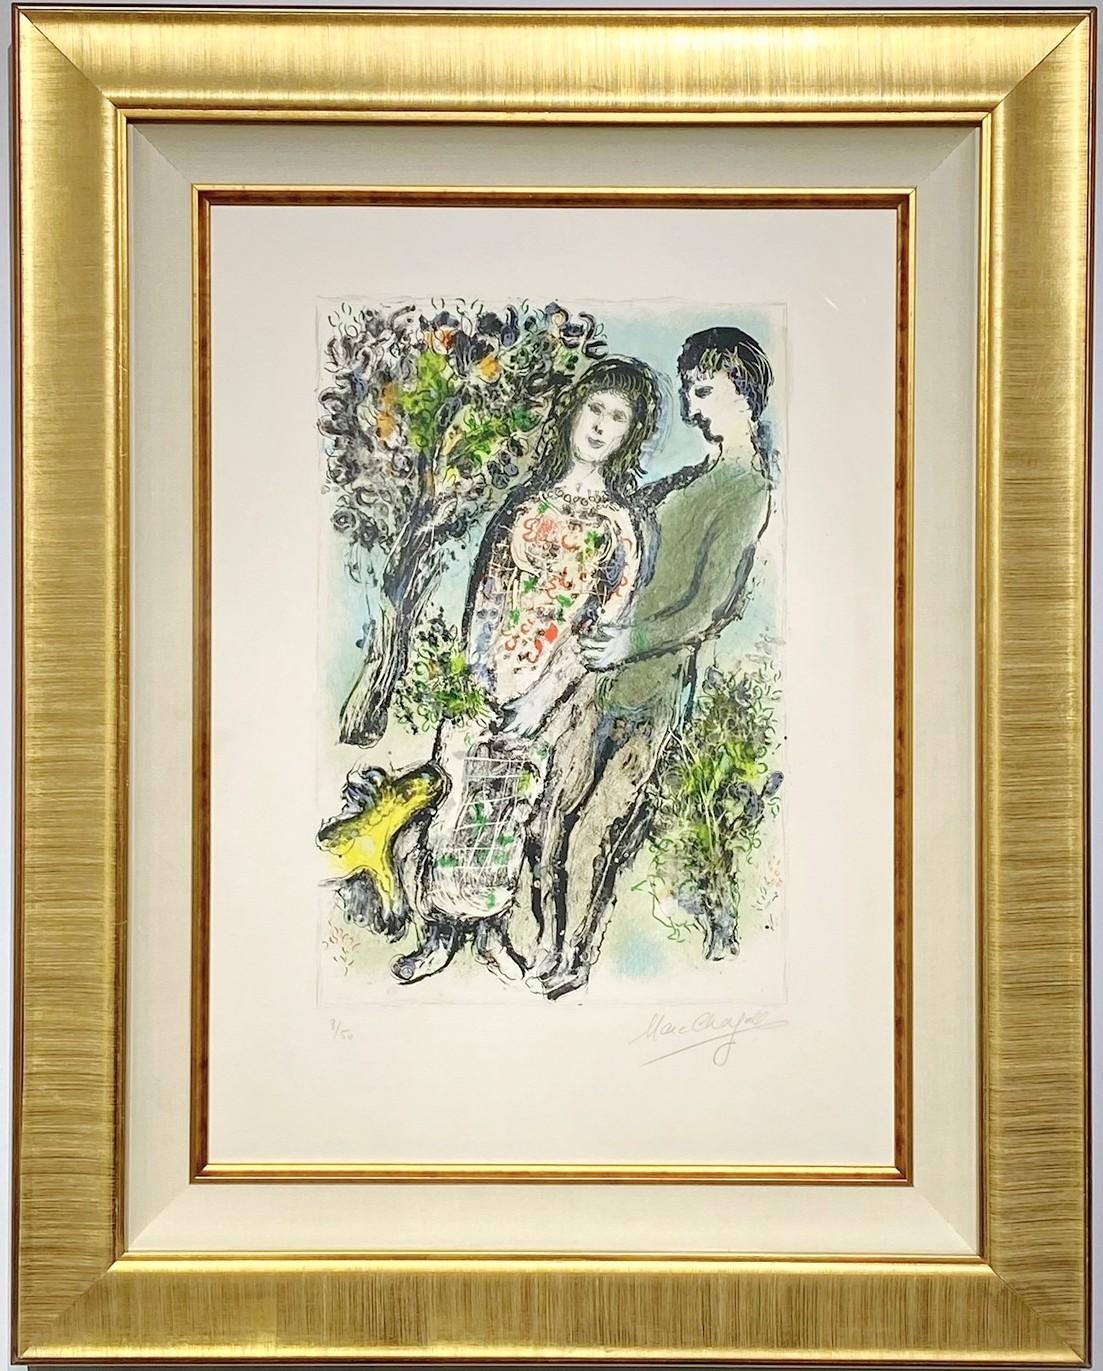 Marc Chagall (Russia/France 1887‑1985). 

”L’Oranger”. 

Year 1975

Signed and numbered Marc Chagall 8/50. Colour lithograph printed on Arches.
Framed 35.5H x 28W x 2D Inches
Illustration Size 48 x 32 cm
Sheet Size 65 x 47 cm.

Mourlot 737

Marc